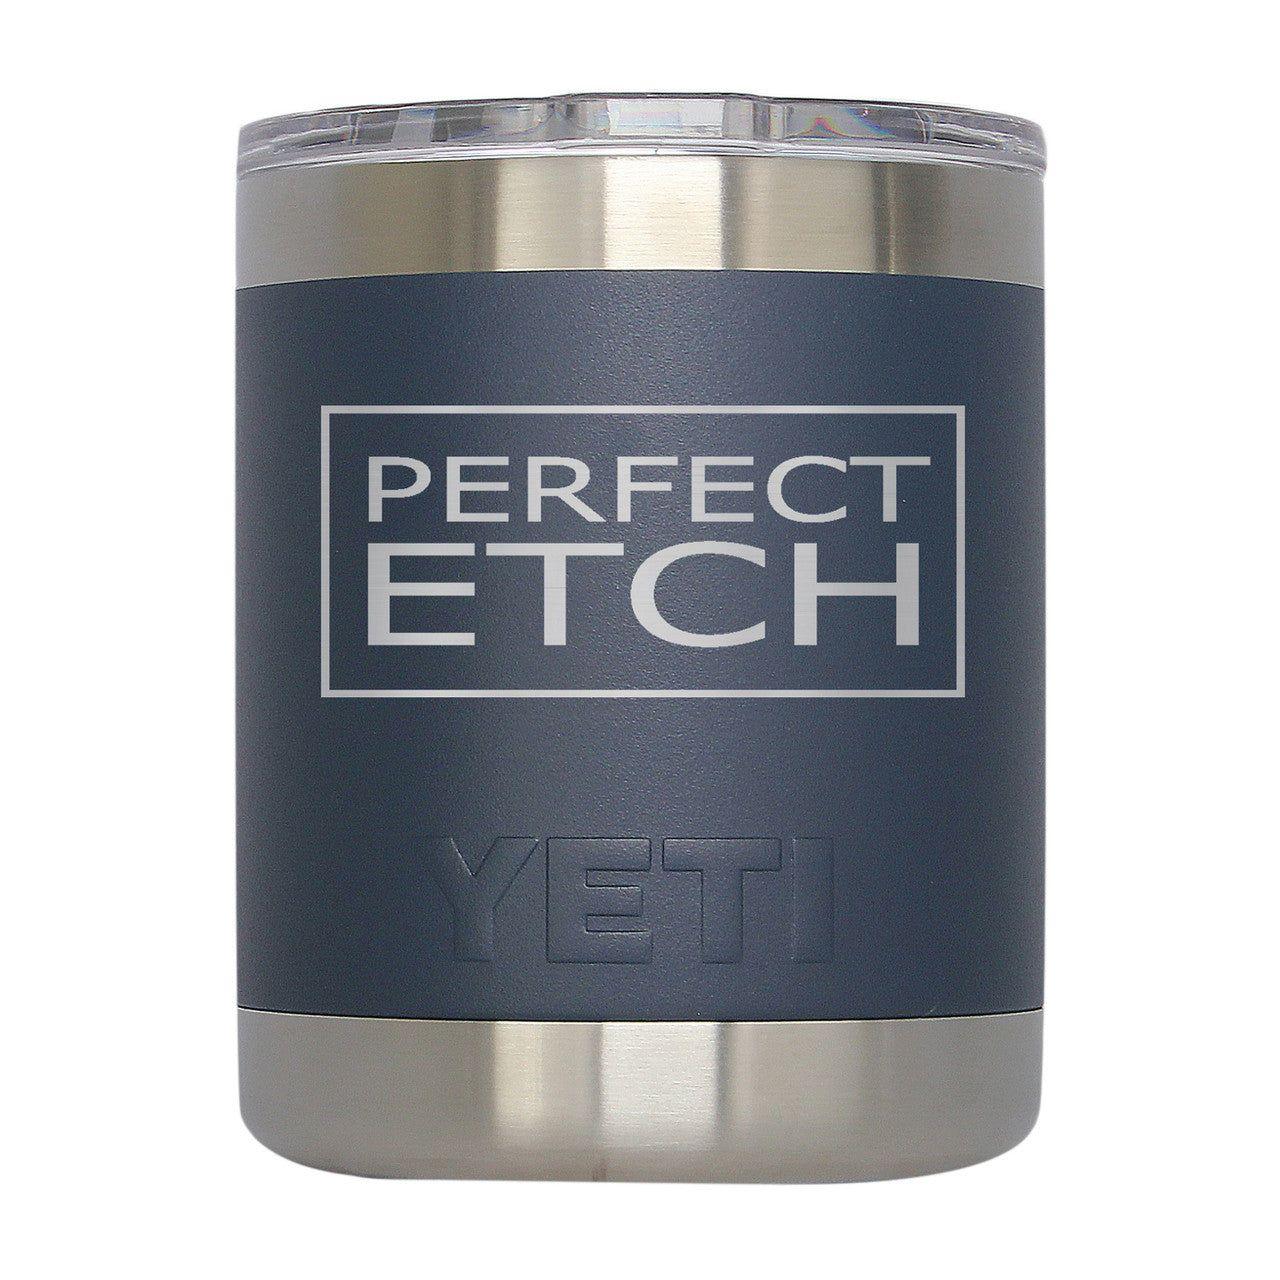 YETI Navy Lowball - Stainless Steel Vacuum Insulated Cup - Perfect Etch